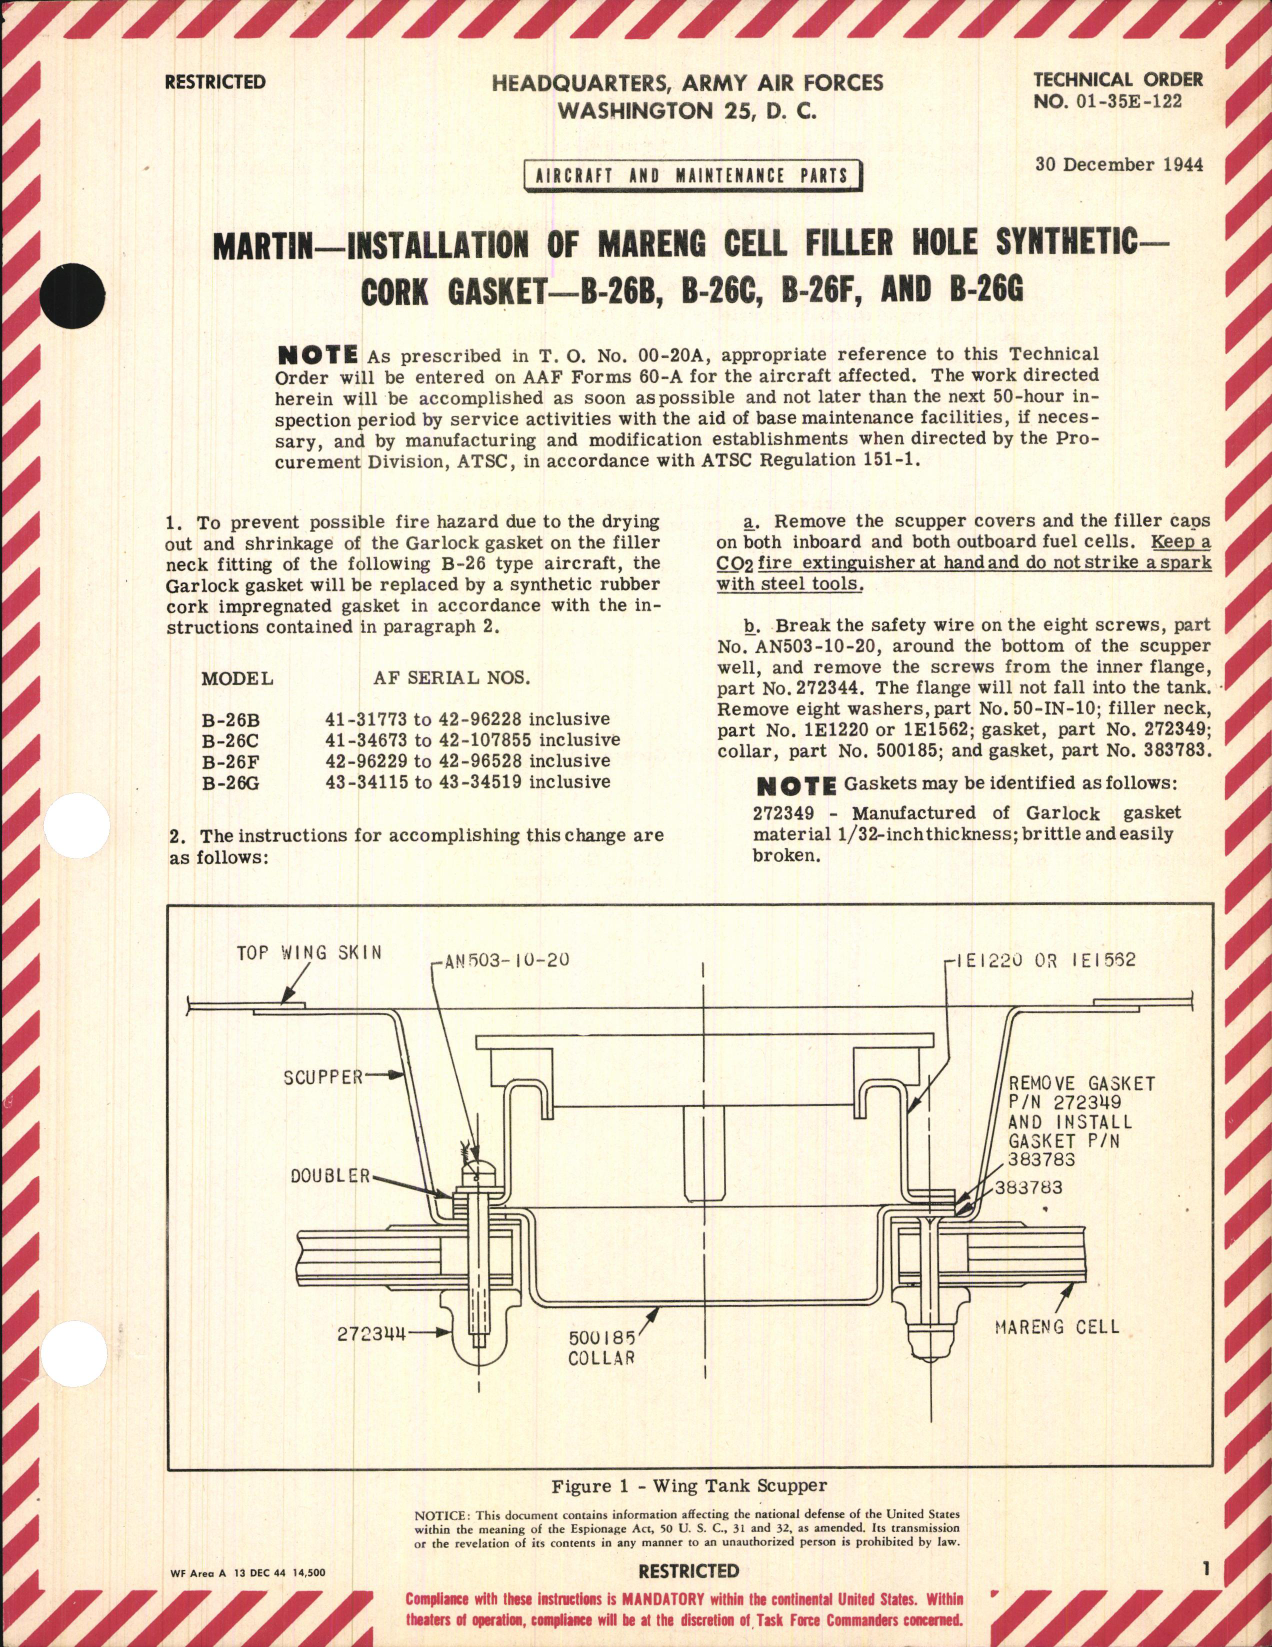 Sample page 1 from AirCorps Library document: Installation of Mareng Cell Filler Hole Synthetic Cork Gasket for B-26B, B-26C, B-26F, and B-26G